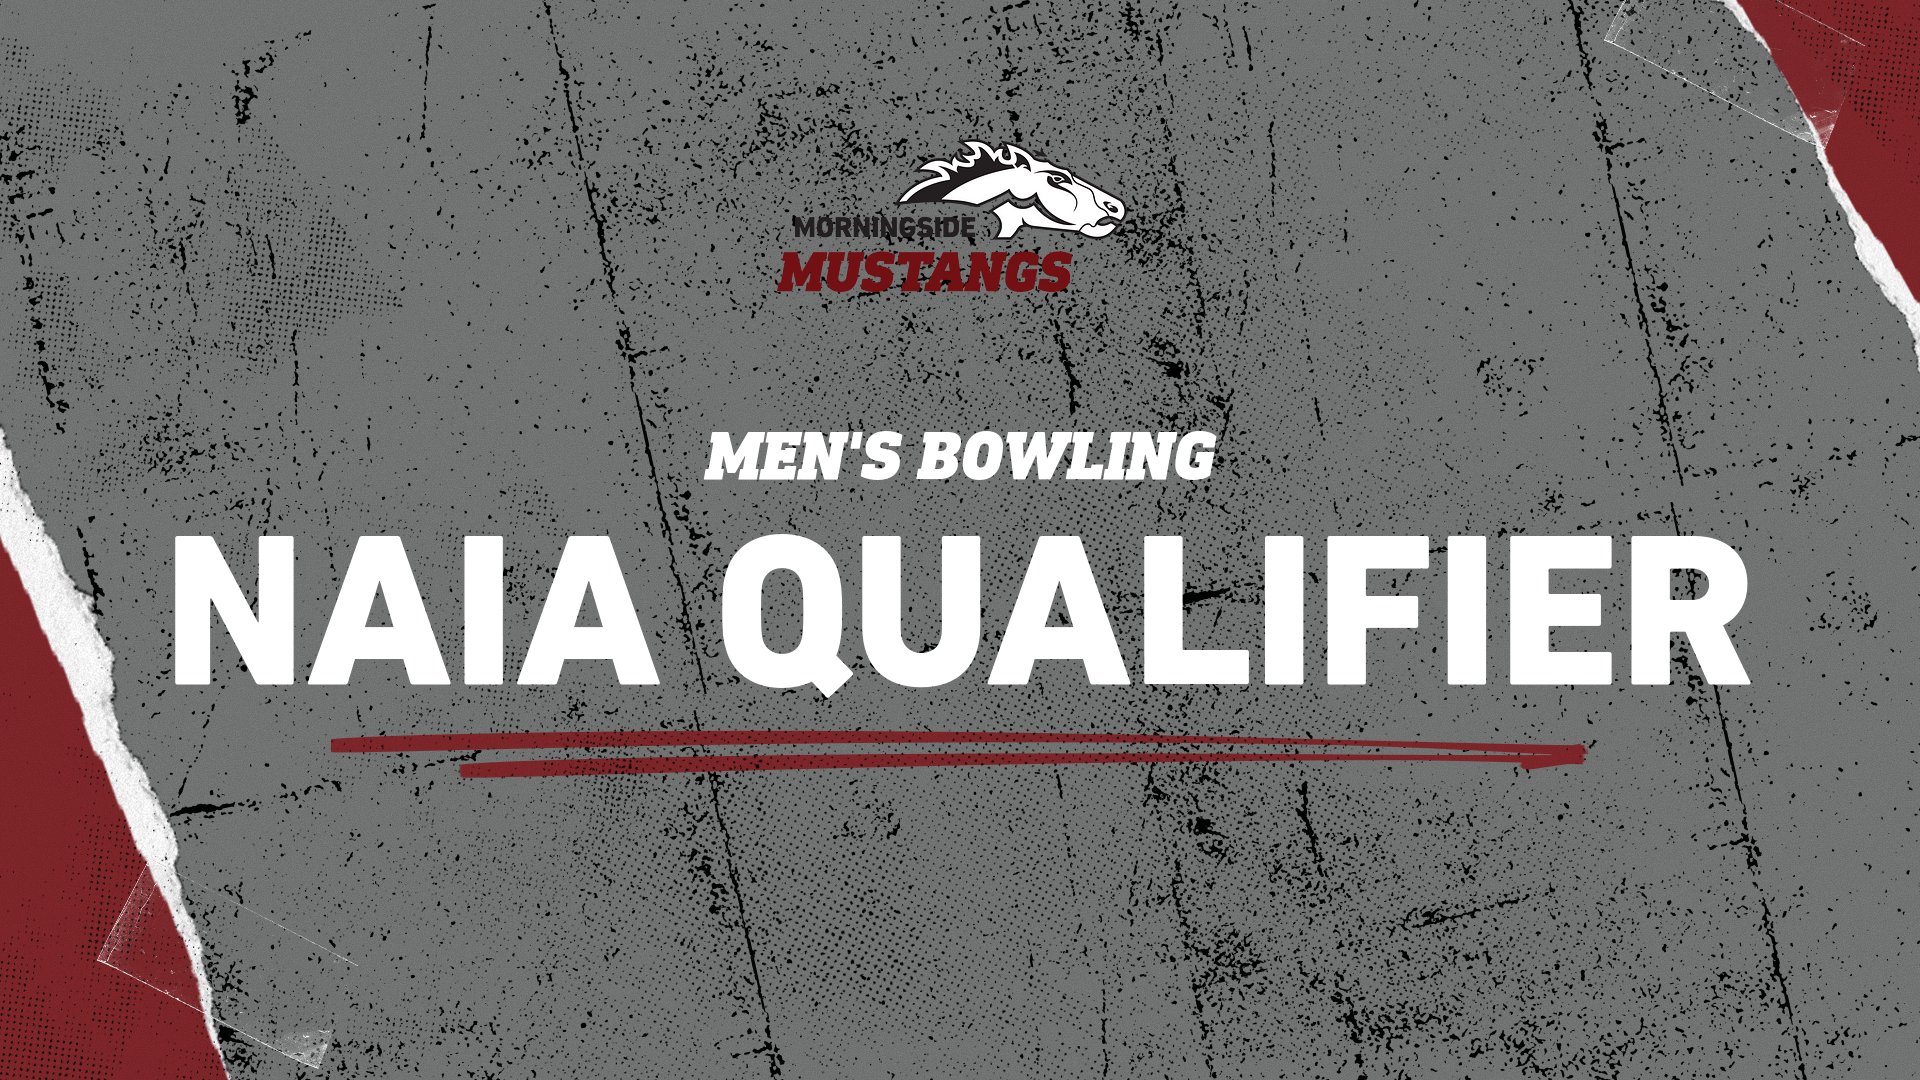 Men's bowling falls in consolation bracket of NAIA qualifier